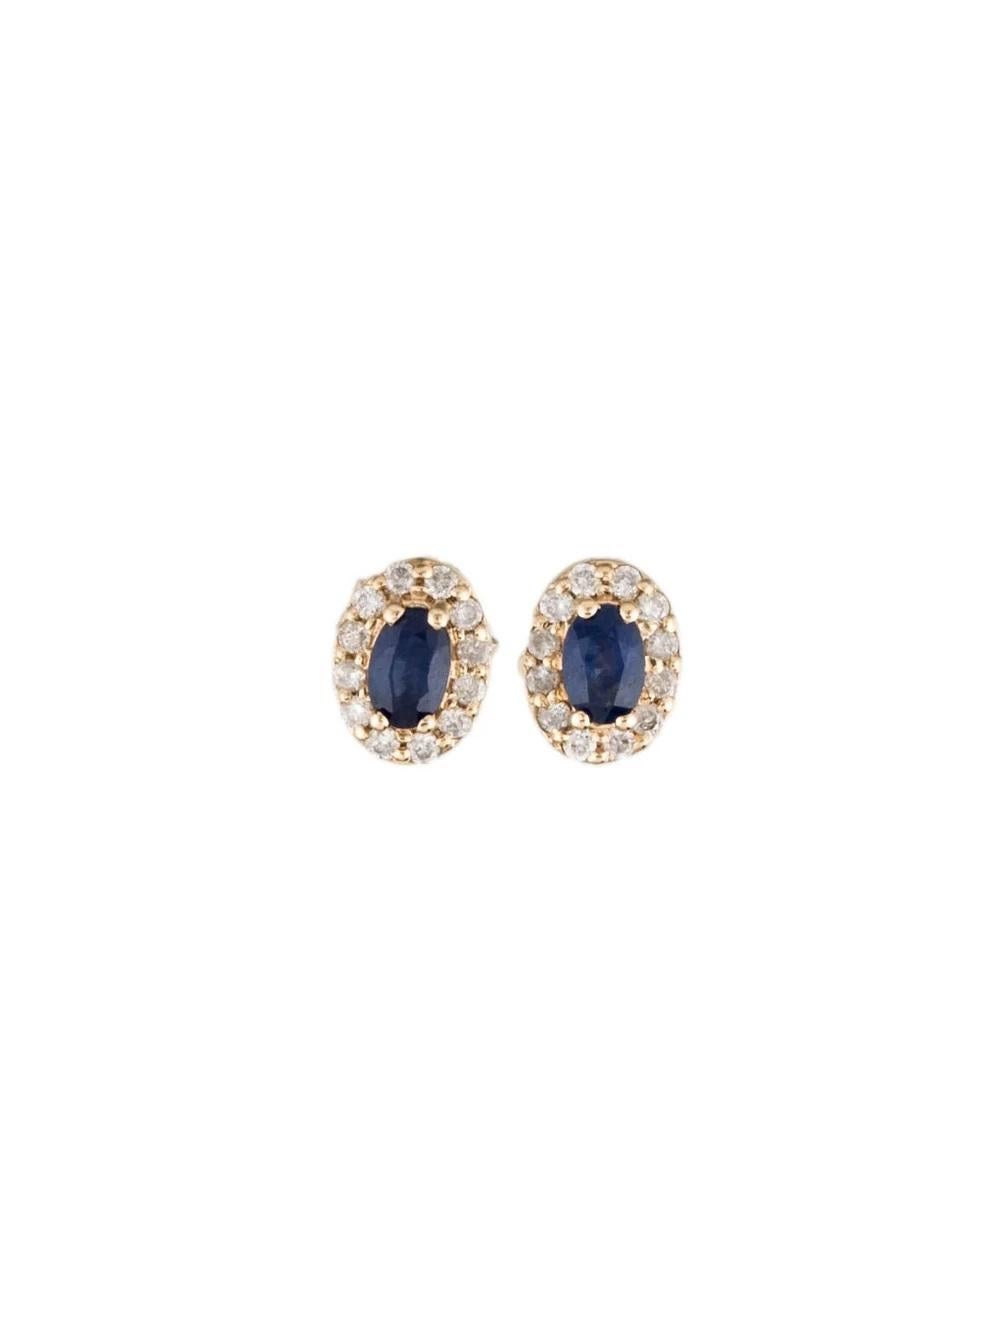 14K Sapphire & Diamond Stud Earrings - Timeless Style, Blue Gemstones, Luxury In New Condition For Sale In Holtsville, NY